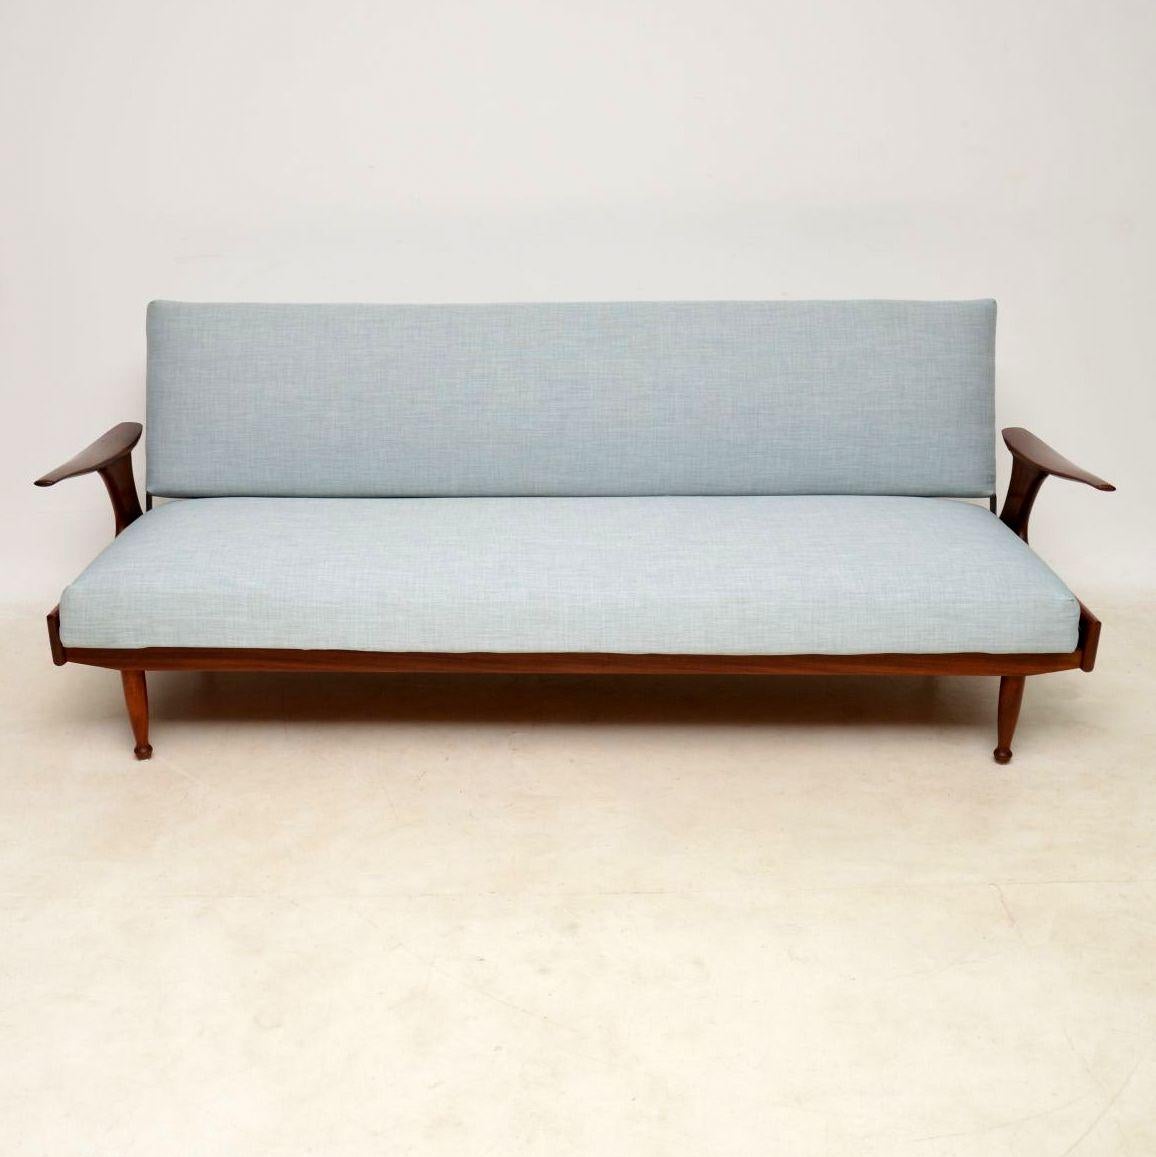 English 1960s Vintage Afromosia Sofa Bed by Greaves & Thomas